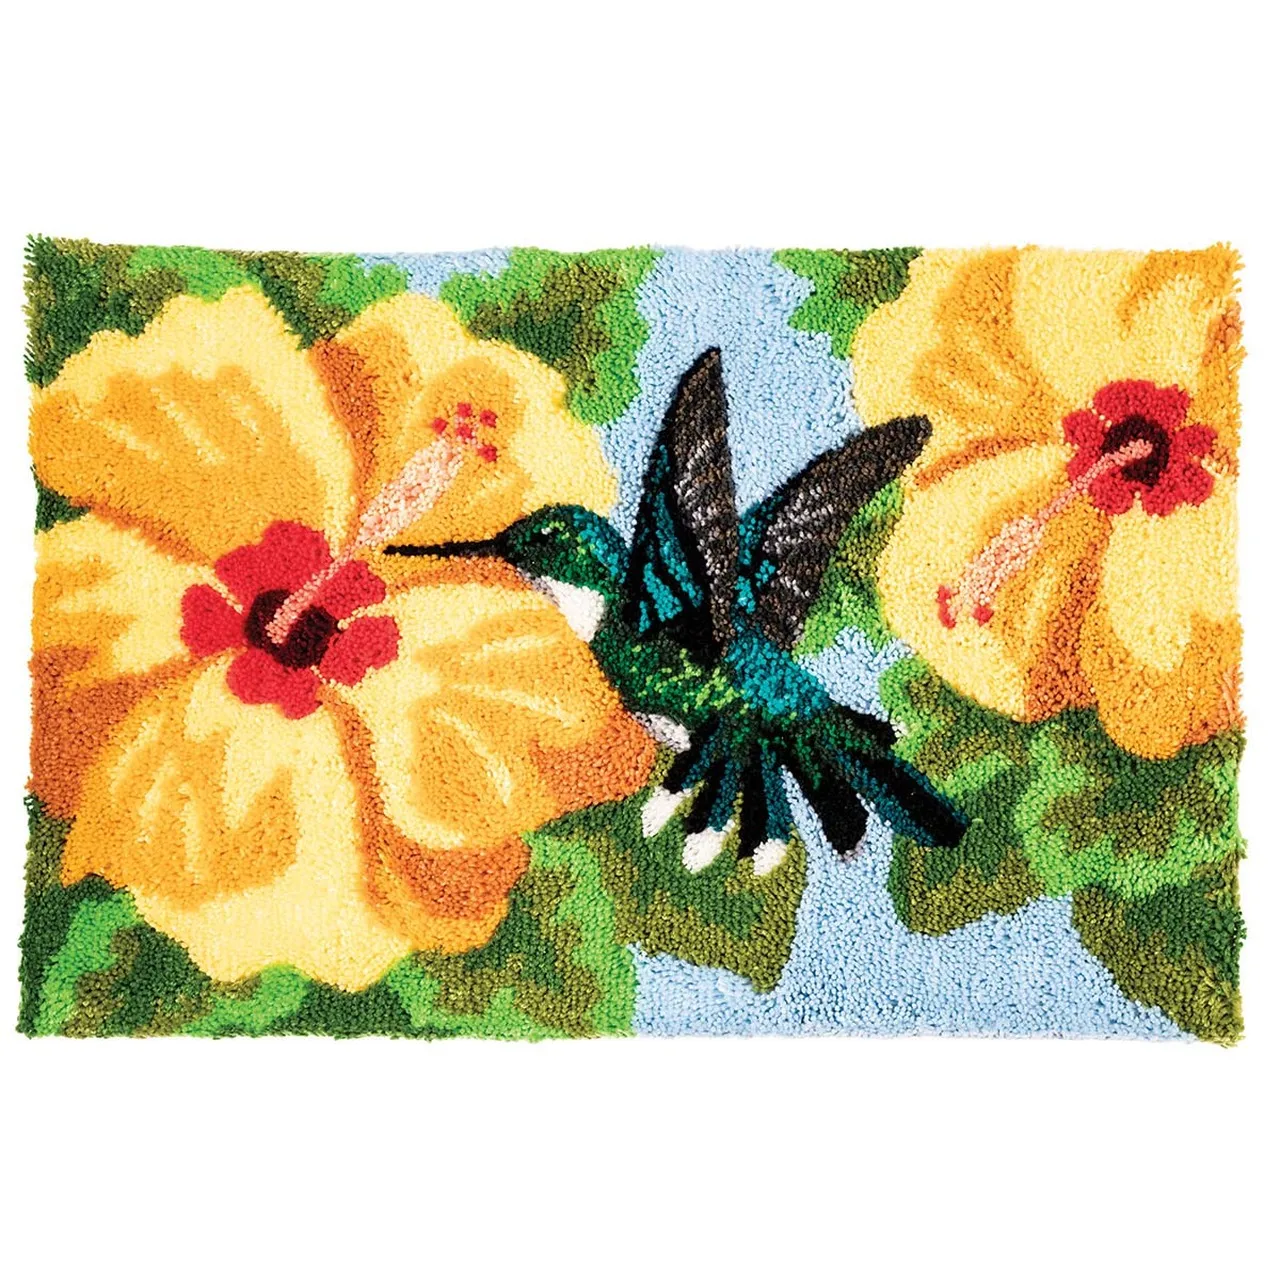 

Latch Hook Kits Hummingbird & Hibiscus Wall Hanging DIY Carpet Rug Pre-Printed Canvas with Non-Skid Backing Floor Mat 102x69cm